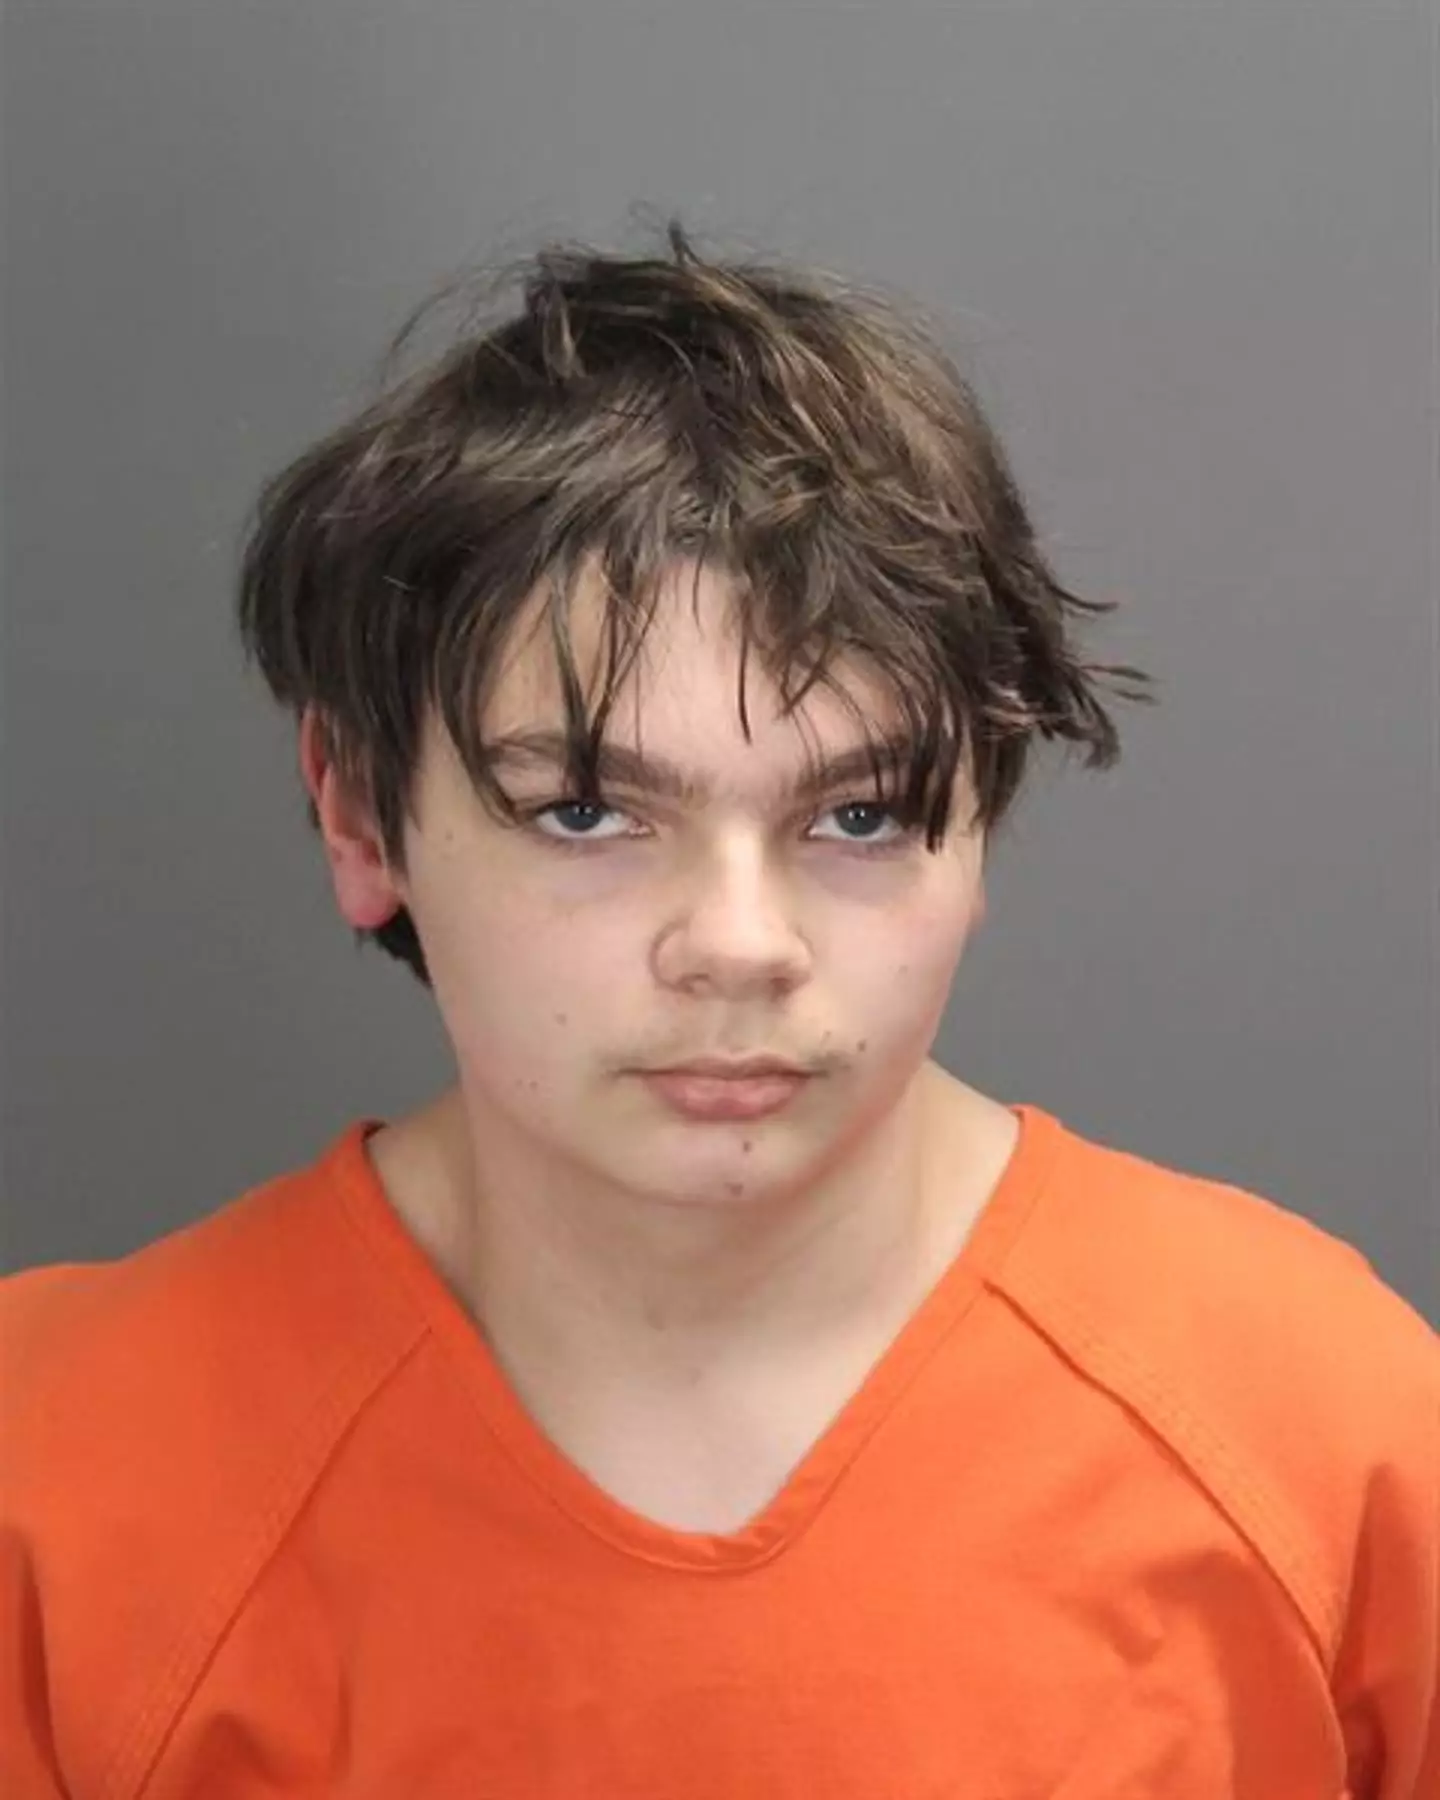 Ethan Crumbley killed four and injured many others during his shooting spree in 2021.